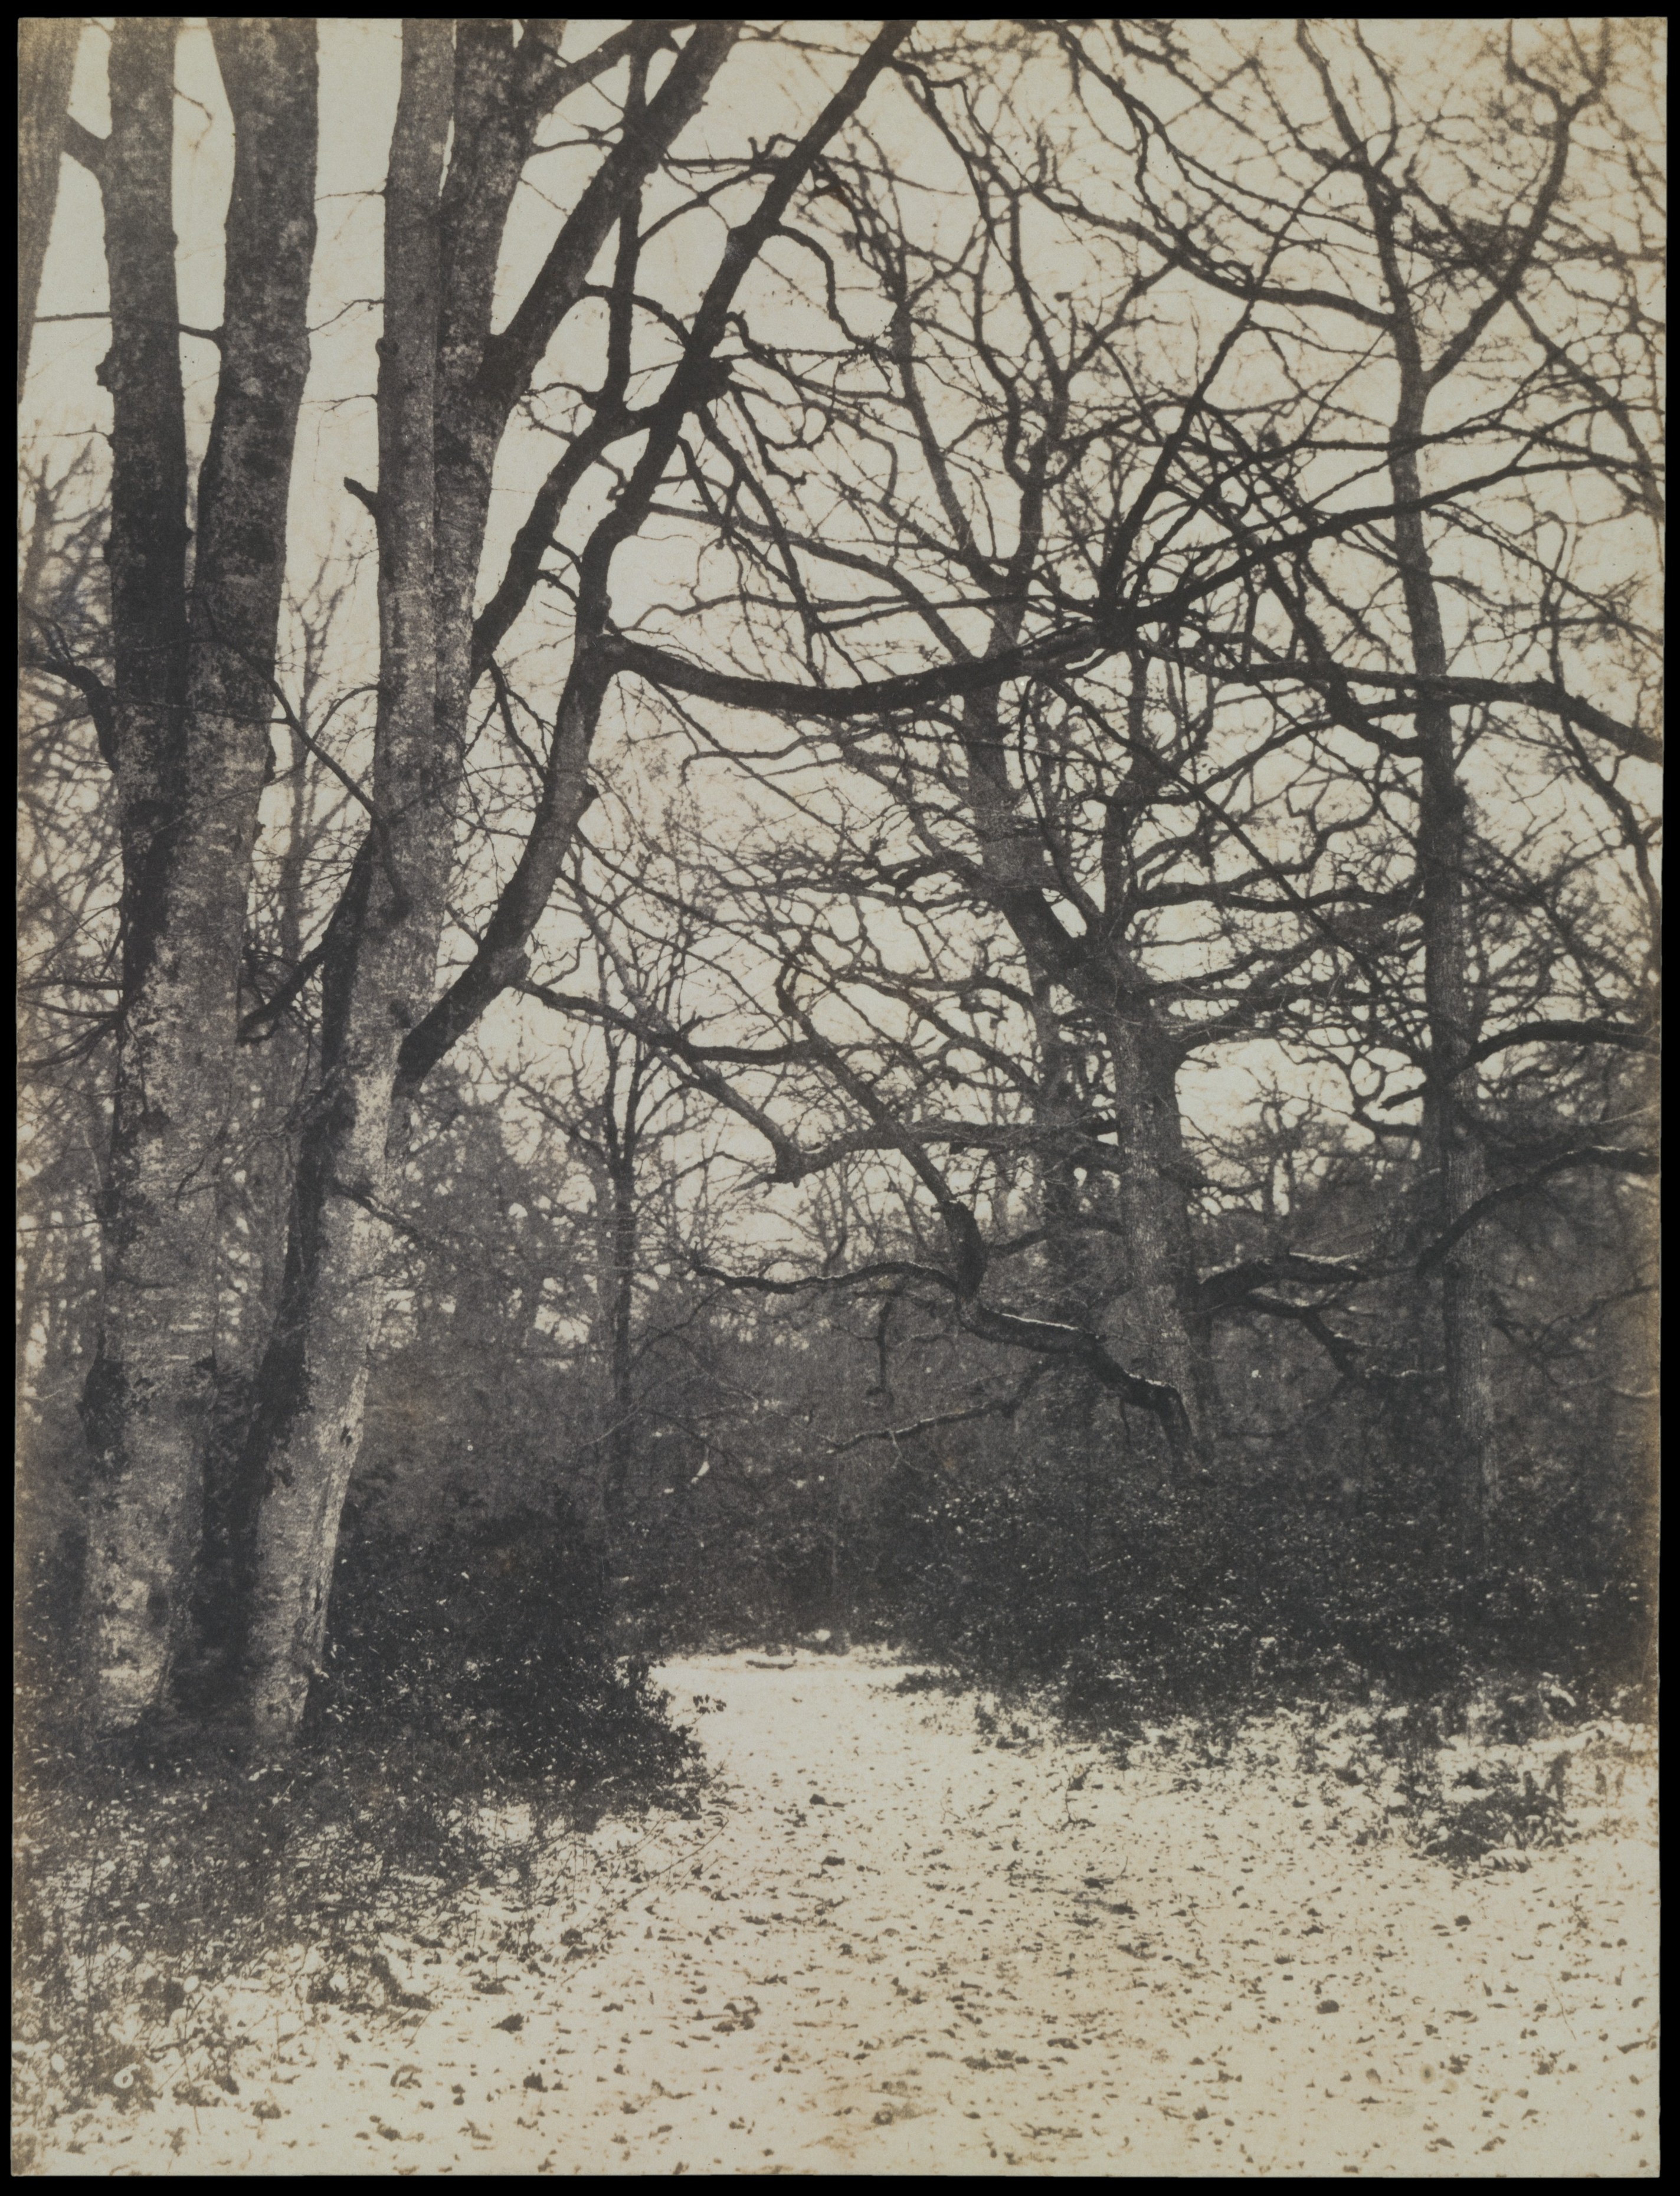 Eugène Cuvelier :: [Fontainebleau Forest], ca. 1860s. Salted paper print from paper negative. | src The Metropolitan Museum